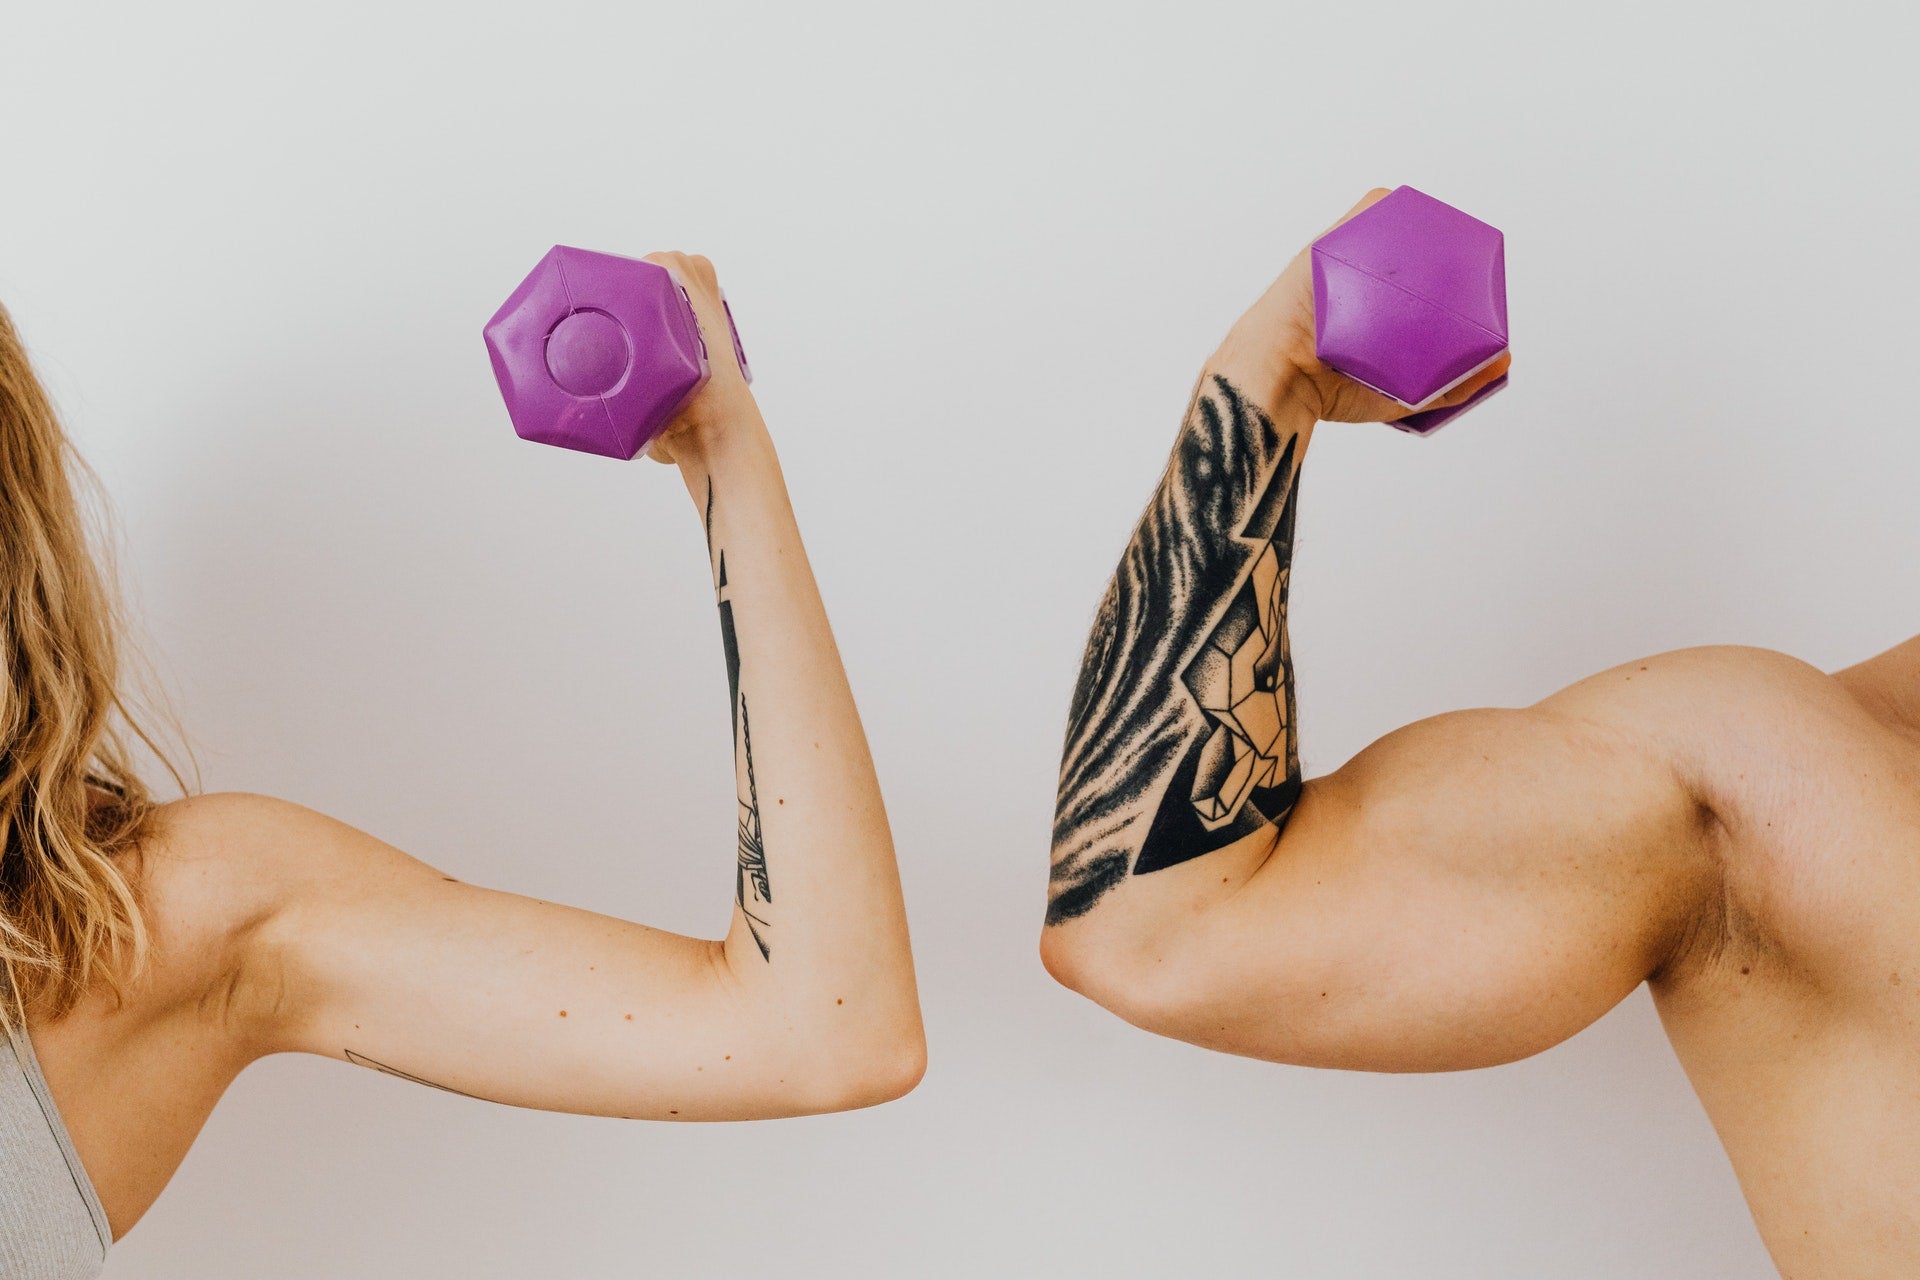 man and woman showing their bicep while holding burbles